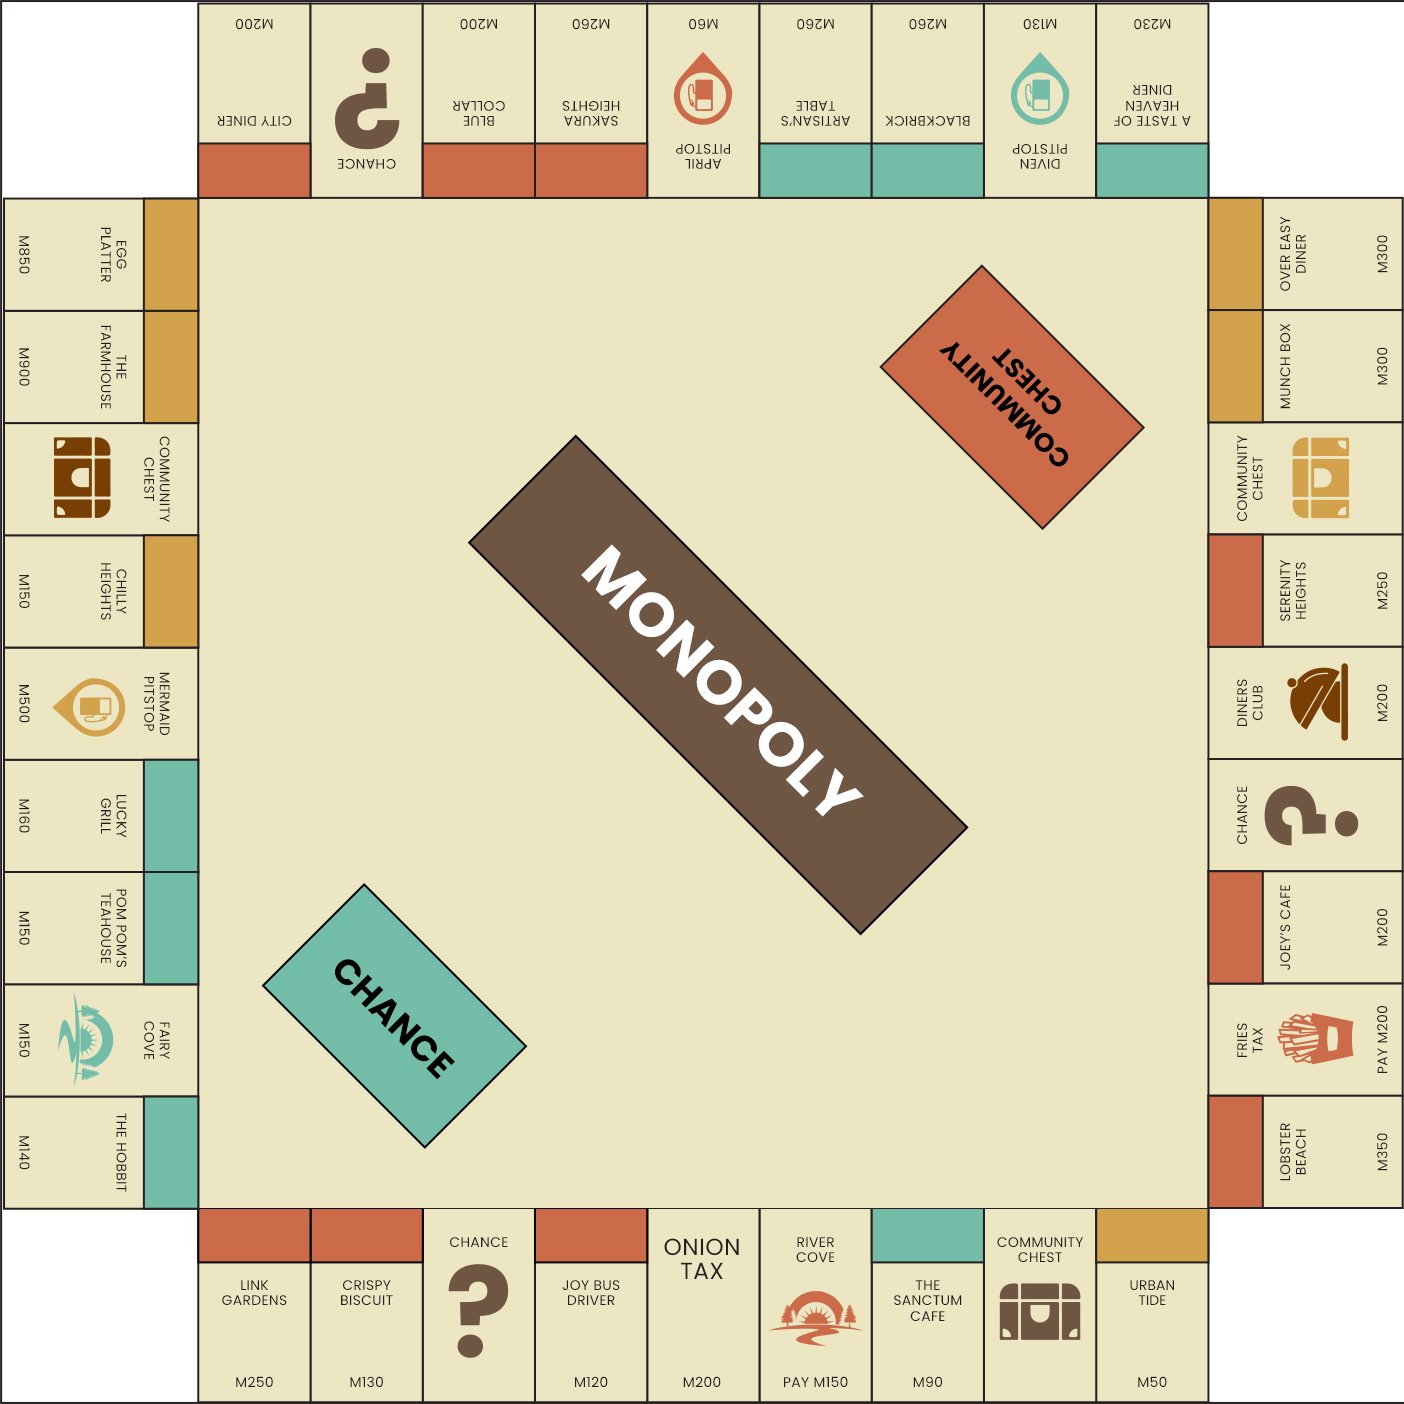 Monopoly - Download Free Games 